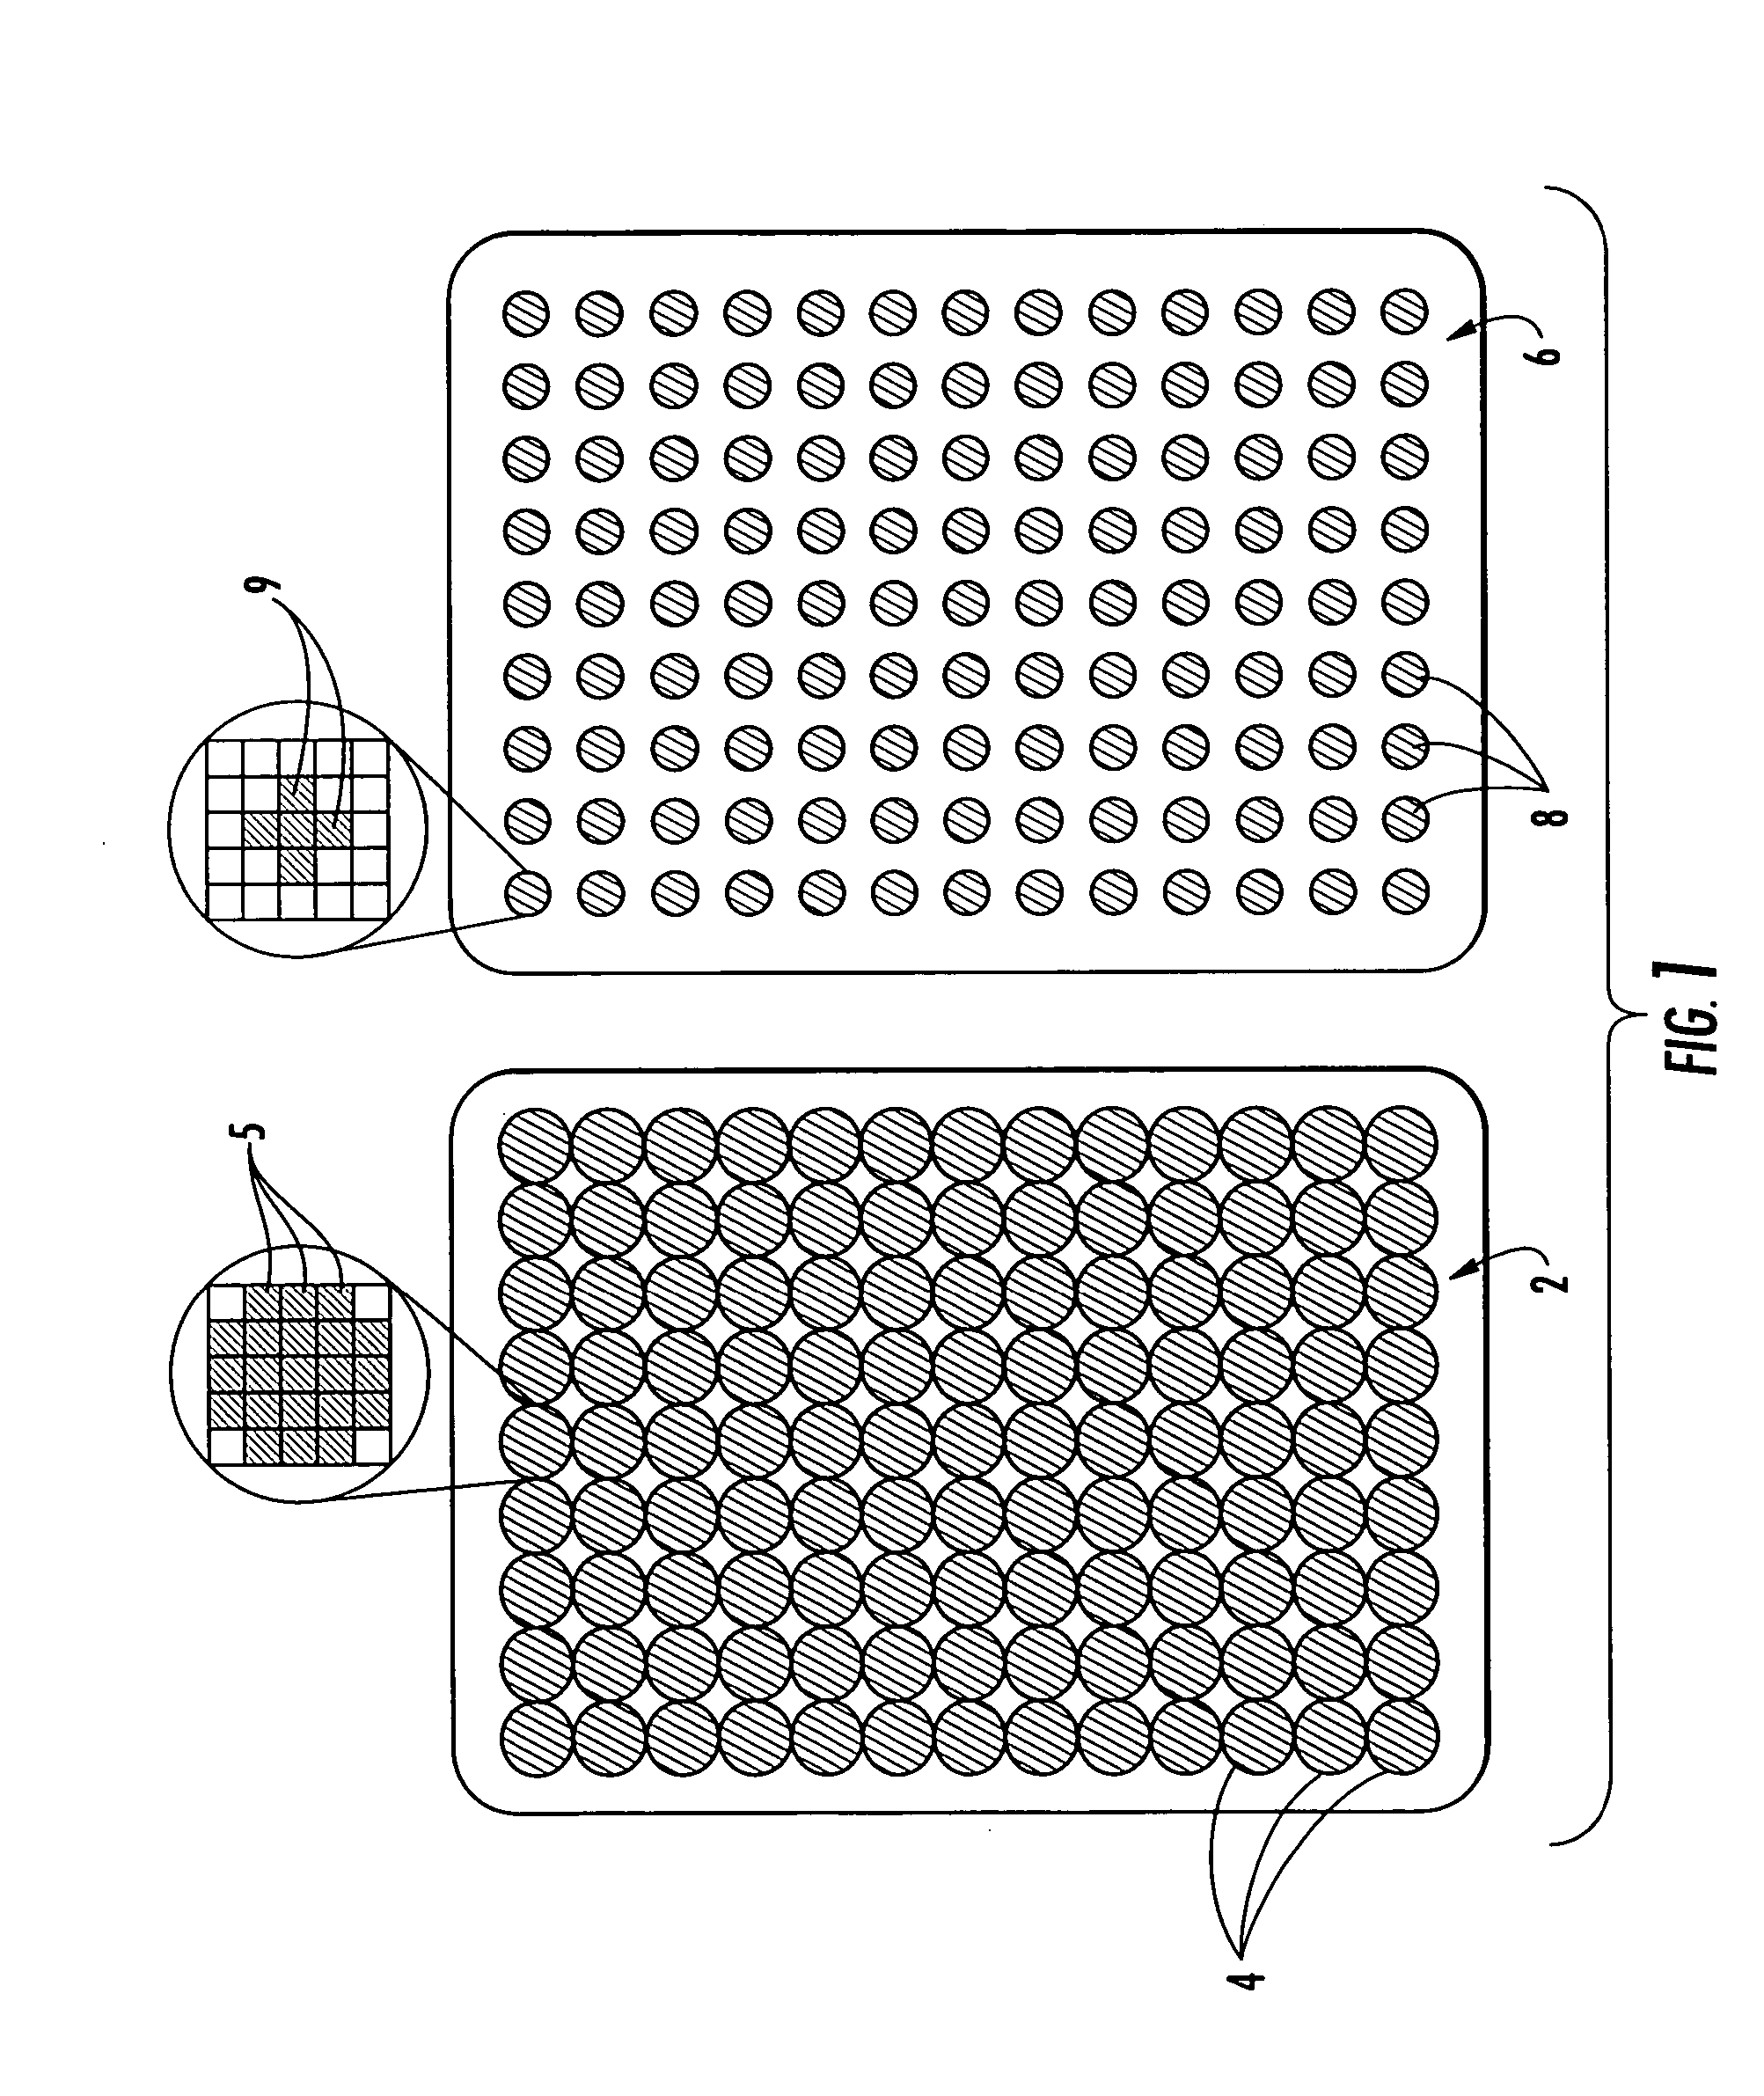 Method of adjusting strobe length in a thermal printer to reduce effects of changes in media transport speed